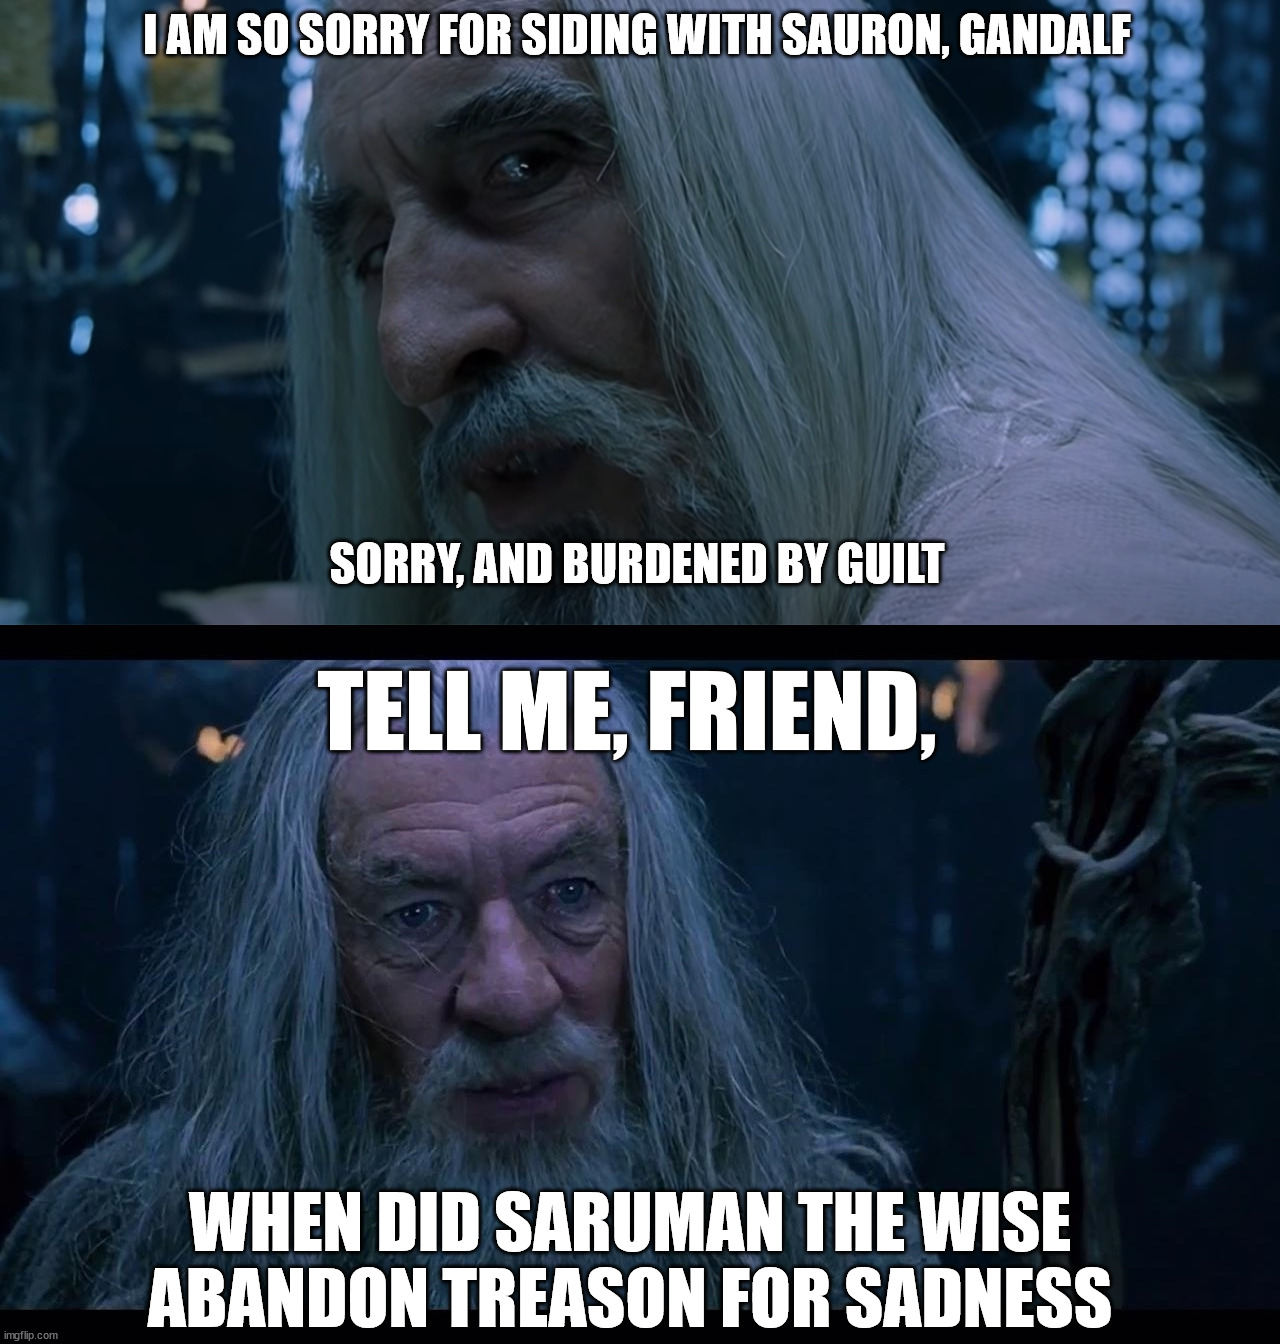 Sad Saruman | I AM SO SORRY FOR SIDING WITH SAURON, GANDALF; SORRY, AND BURDENED BY GUILT; TELL ME, FRIEND, WHEN DID SARUMAN THE WISE ABANDON TREASON FOR SADNESS | image tagged in saruman sou you have chosen death,gandalf madness for reason | made w/ Imgflip meme maker